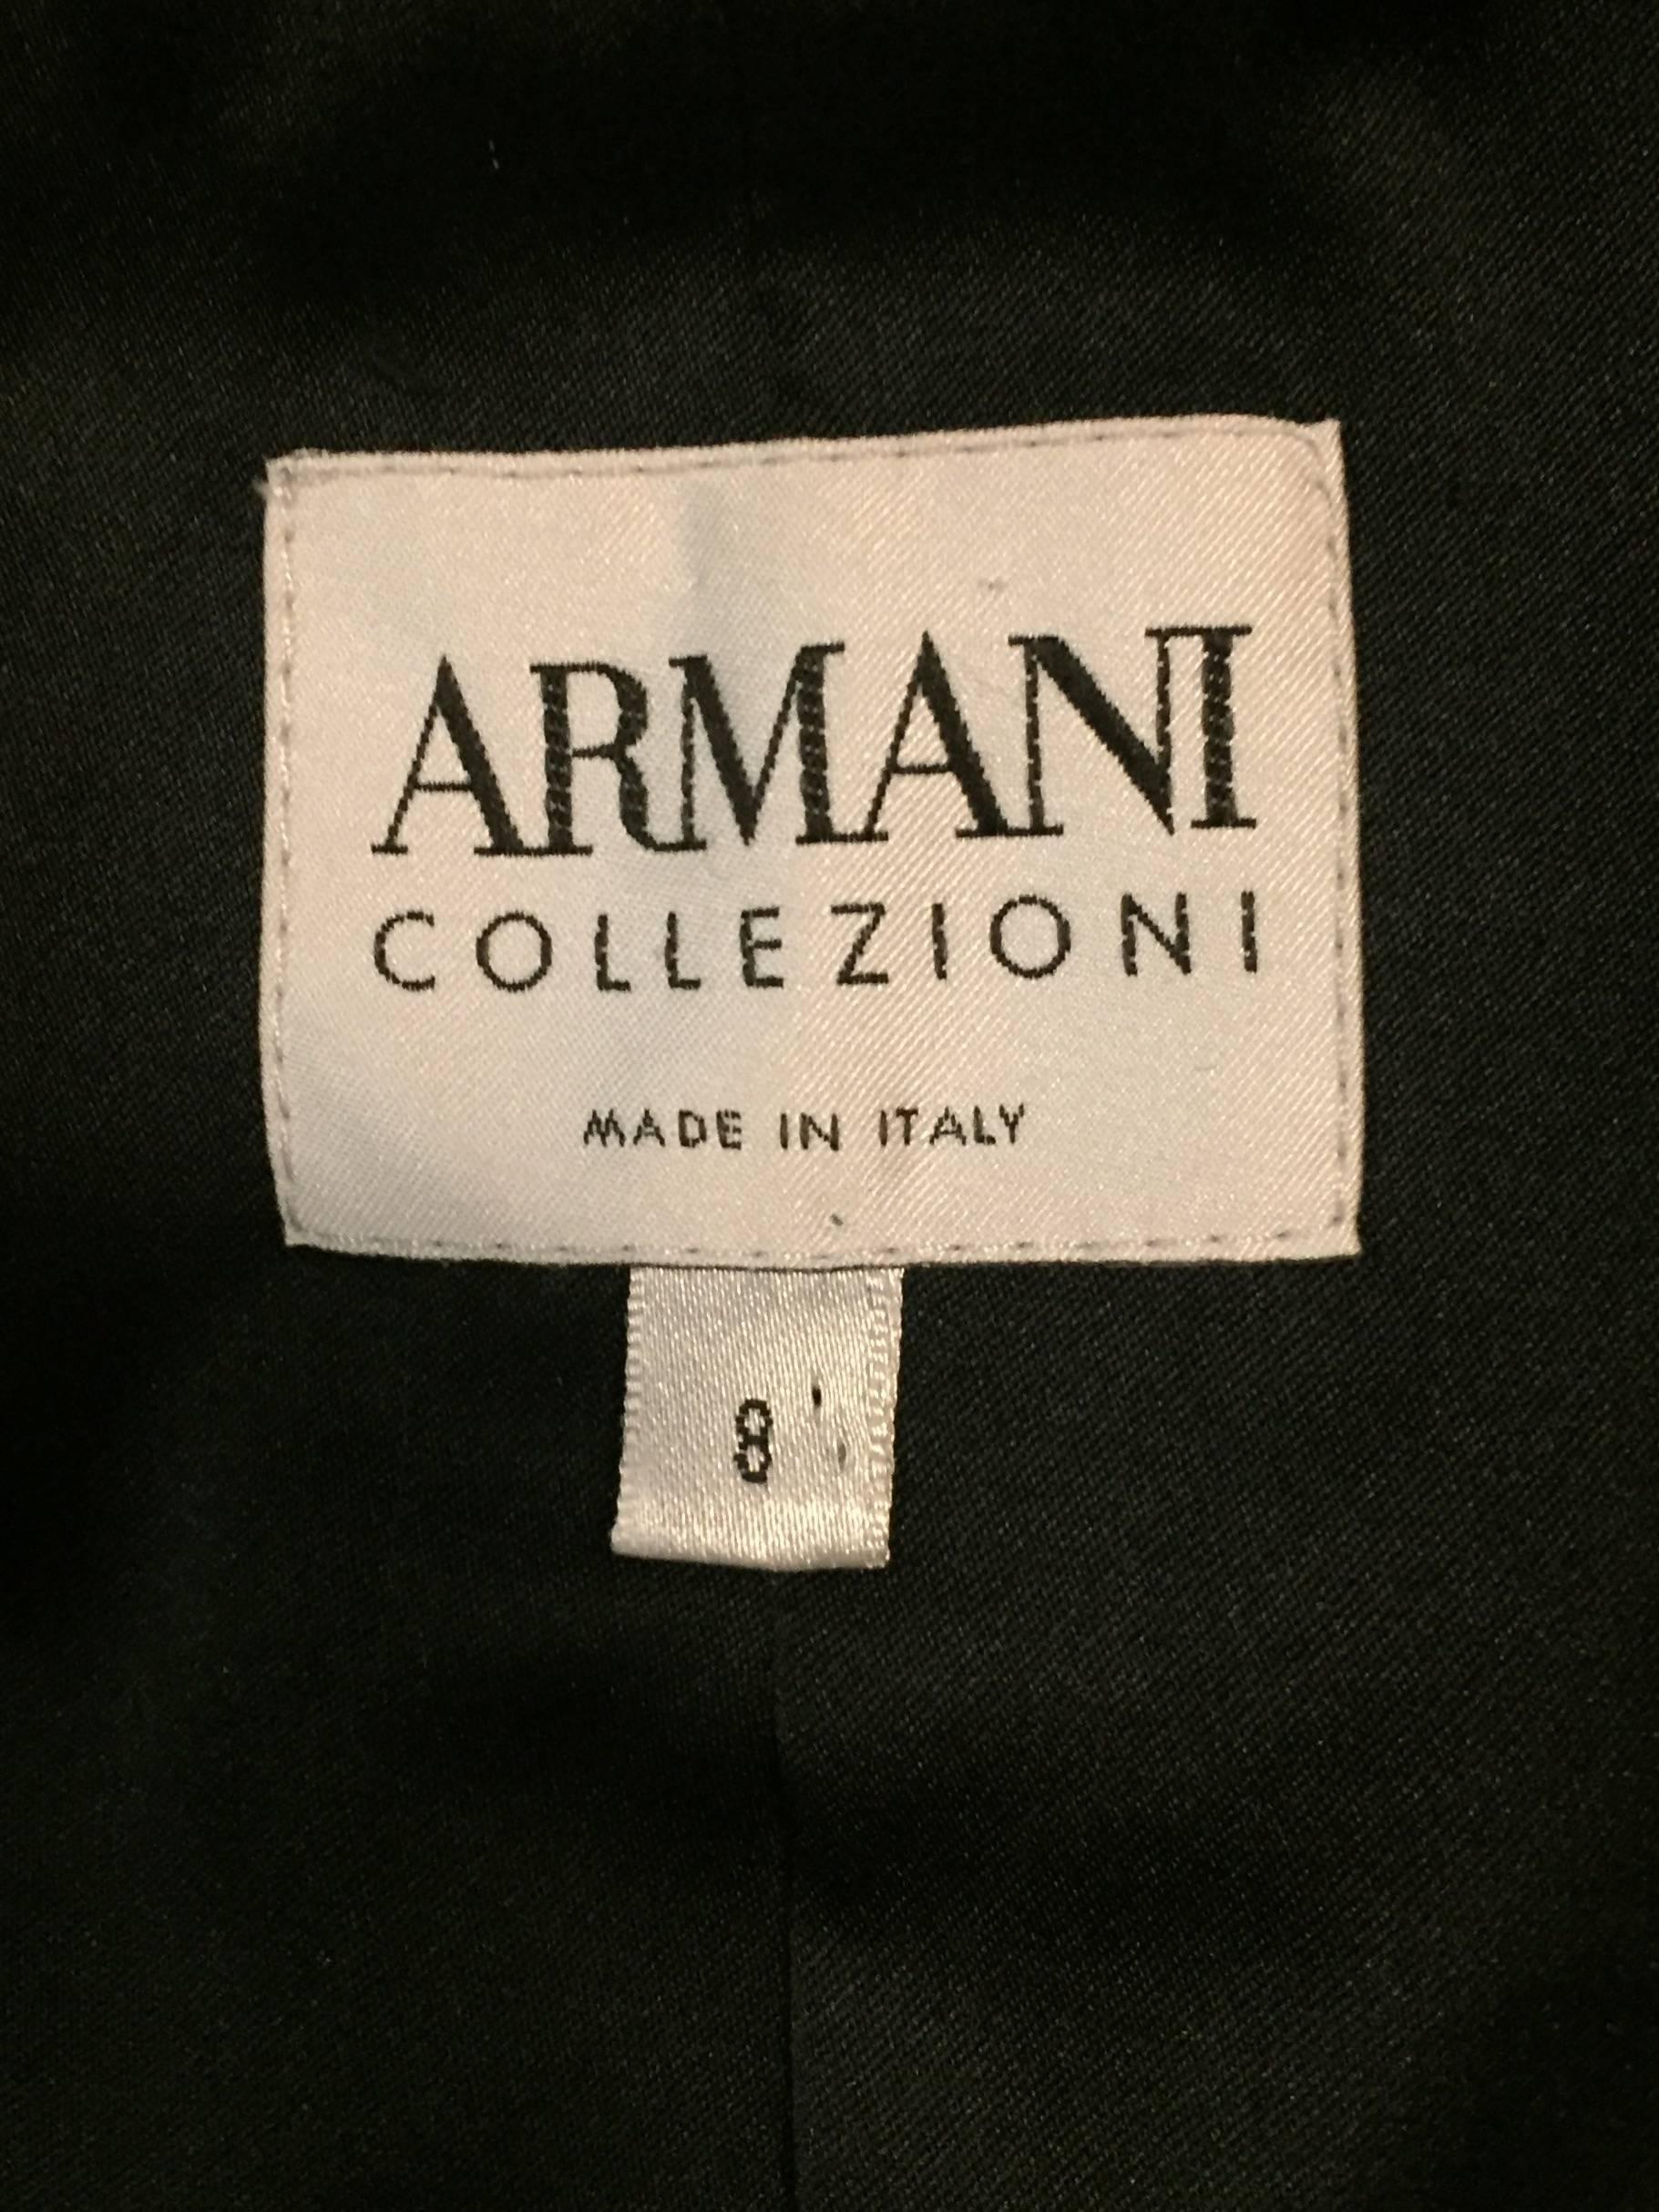 Armani Collezioni's gorgeous rich black velvet jacket features a round shawl collar and single button closure, but has another hidden button with loop below the bust for added support.  Elegant, tailored silhouette is ideal for any occasion day or